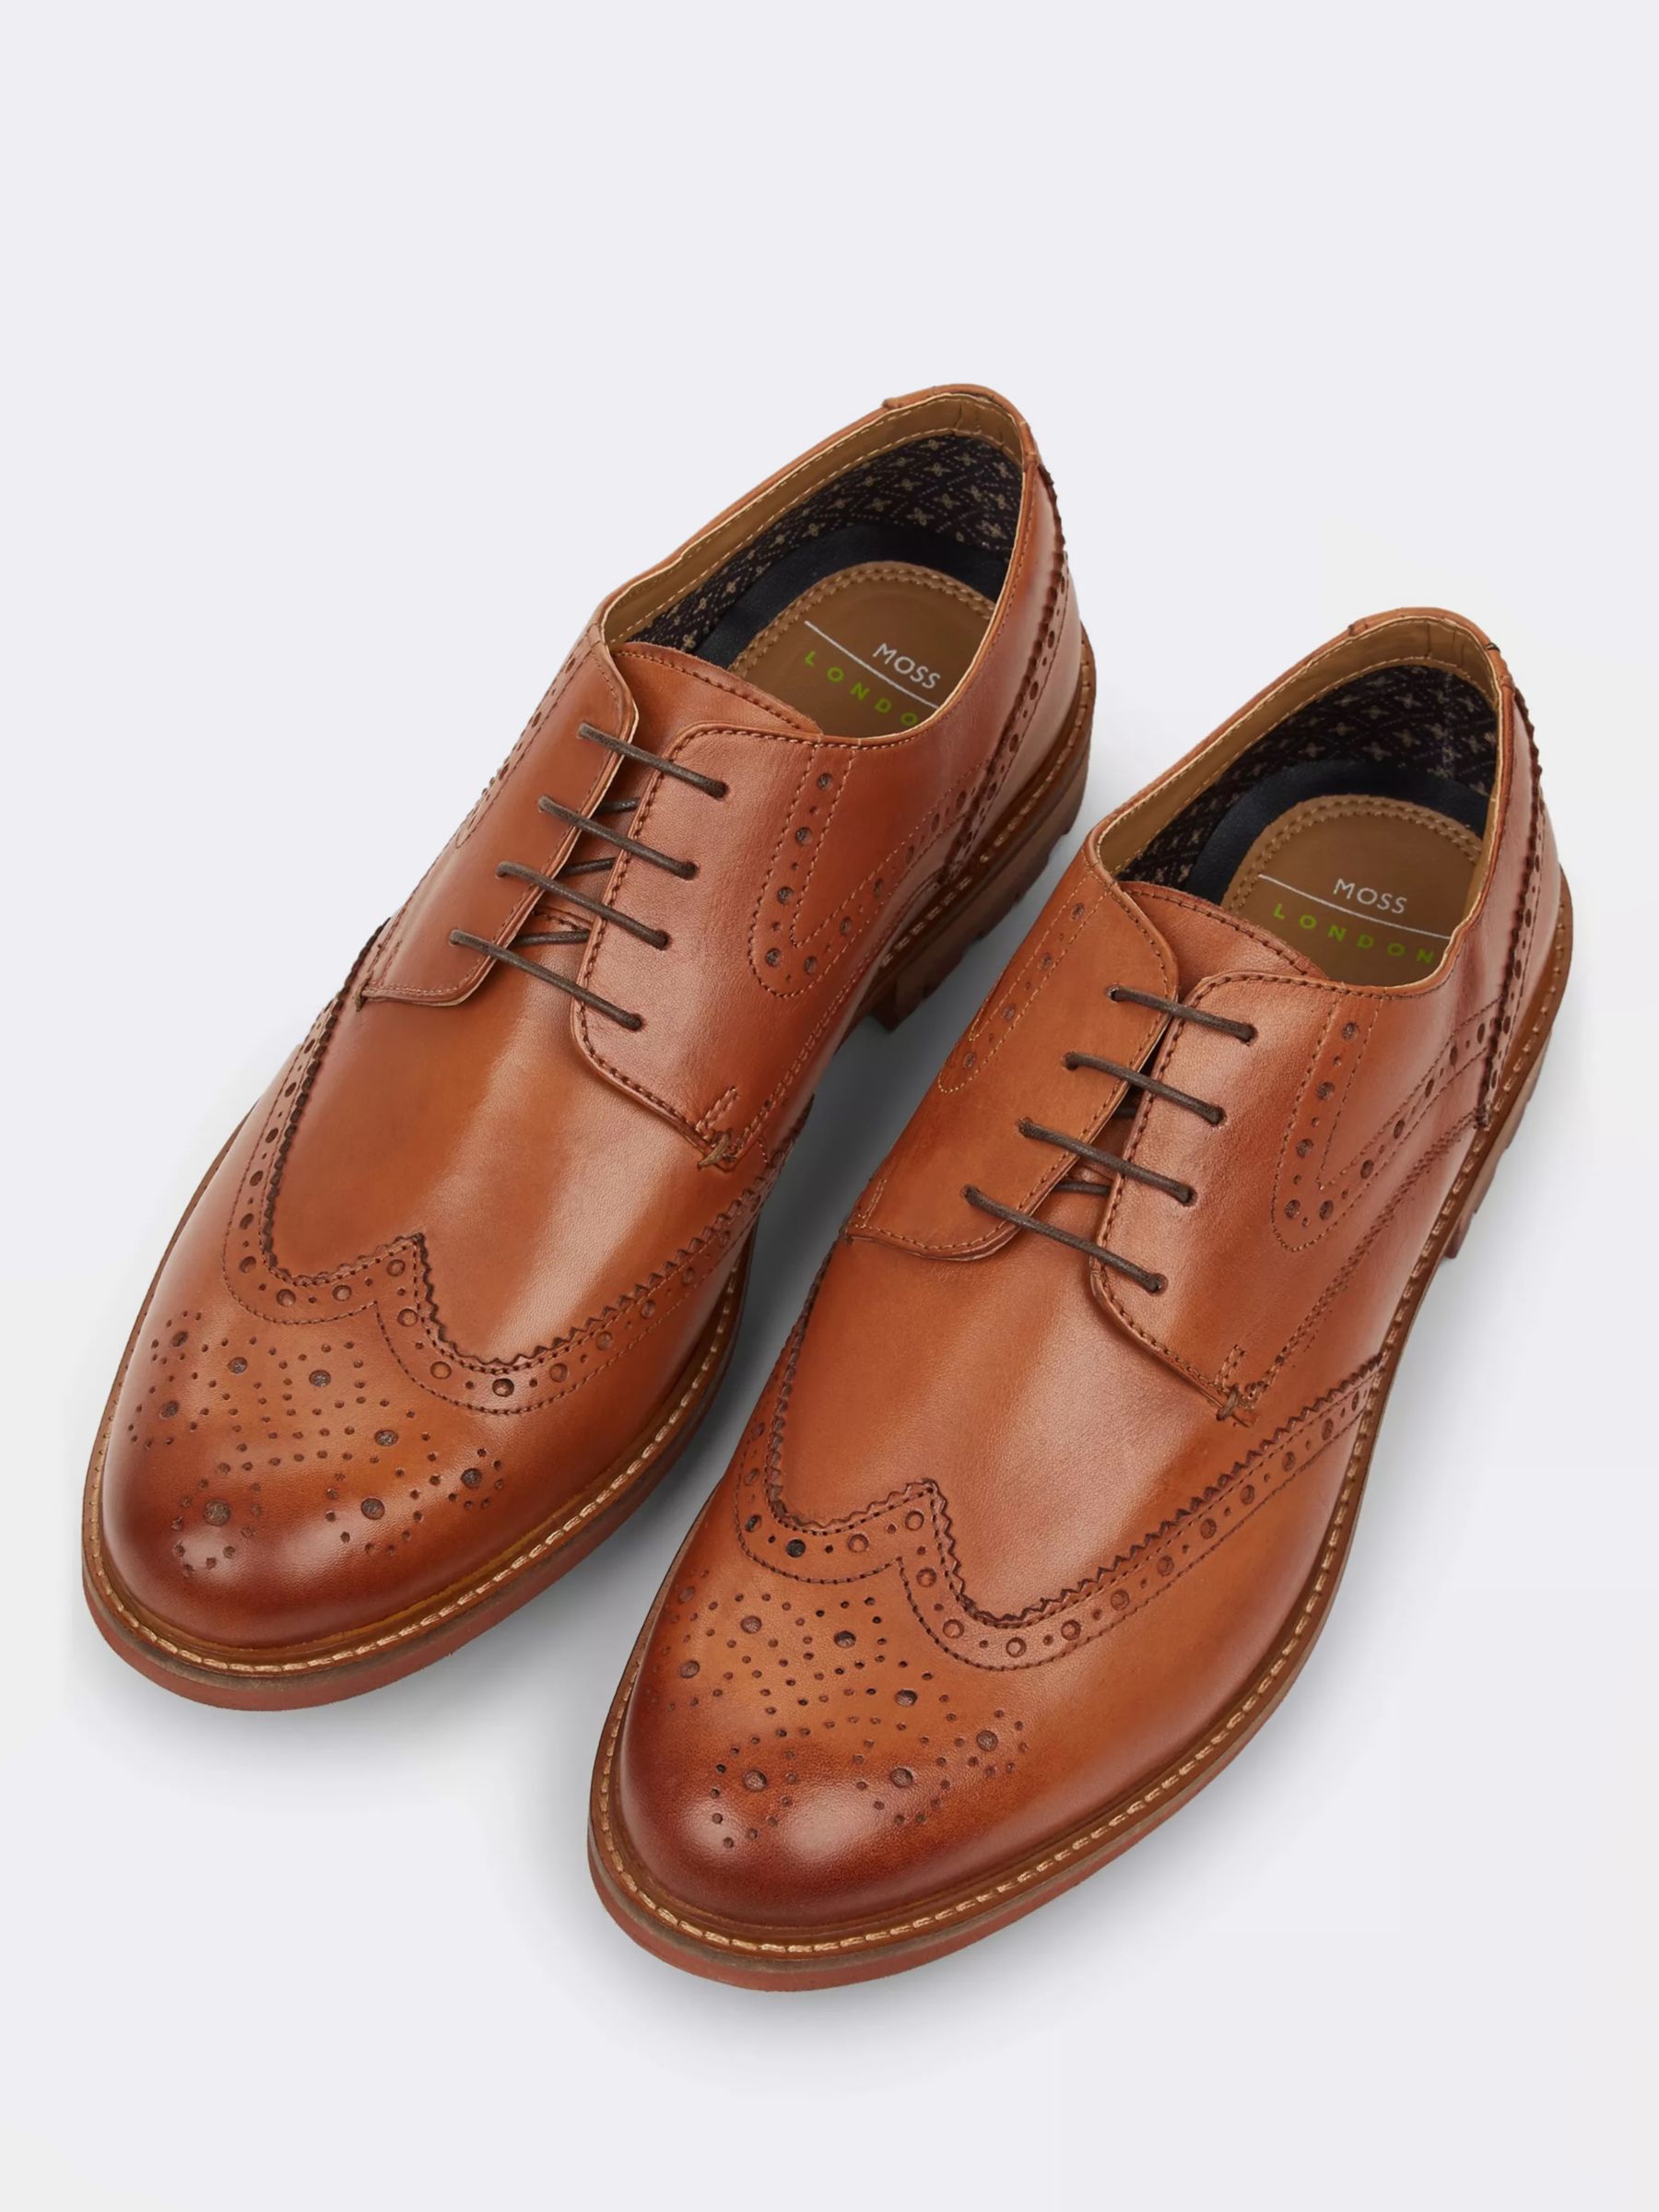 Moss Bray Leather Brogues, Tan, 6